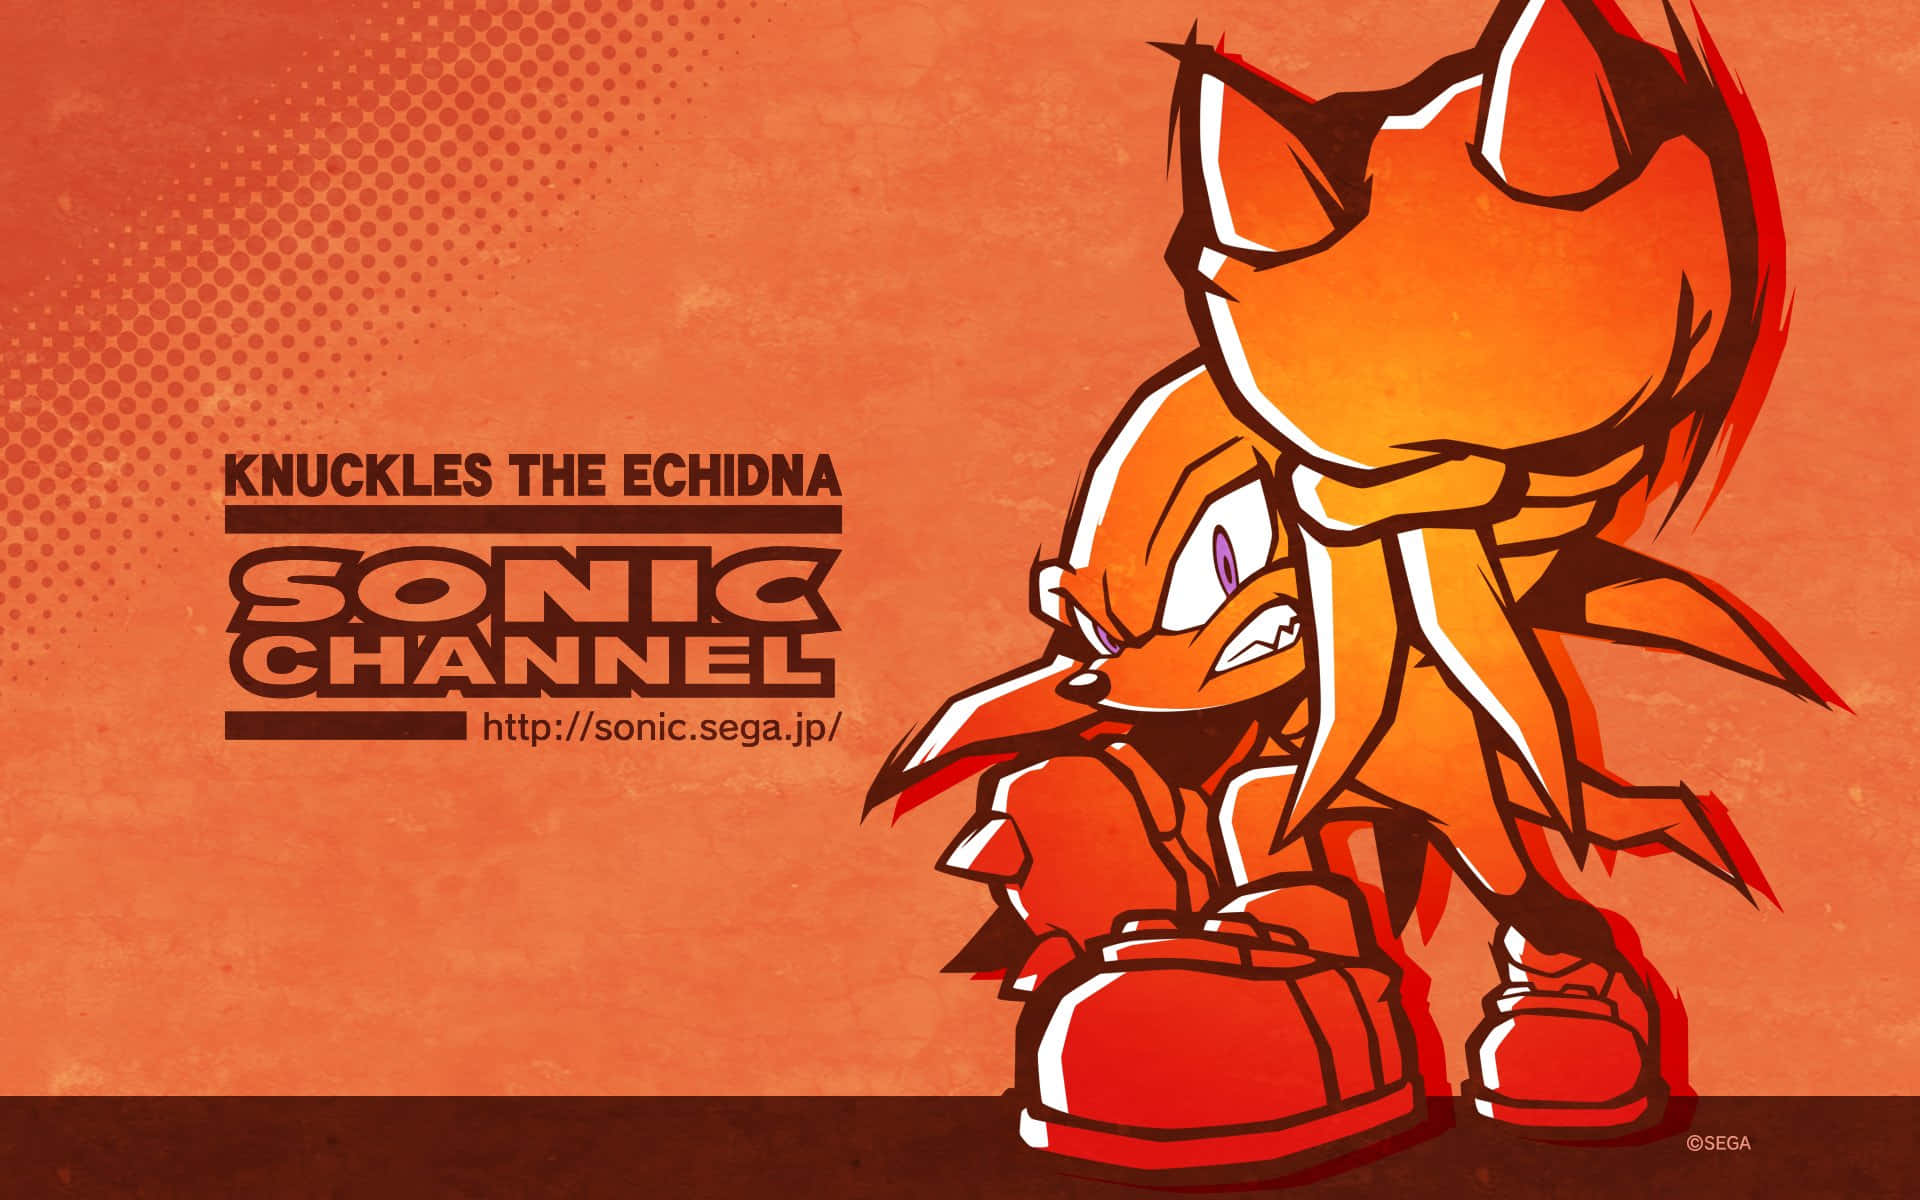 Sonic Channel - Kludge The Econoda